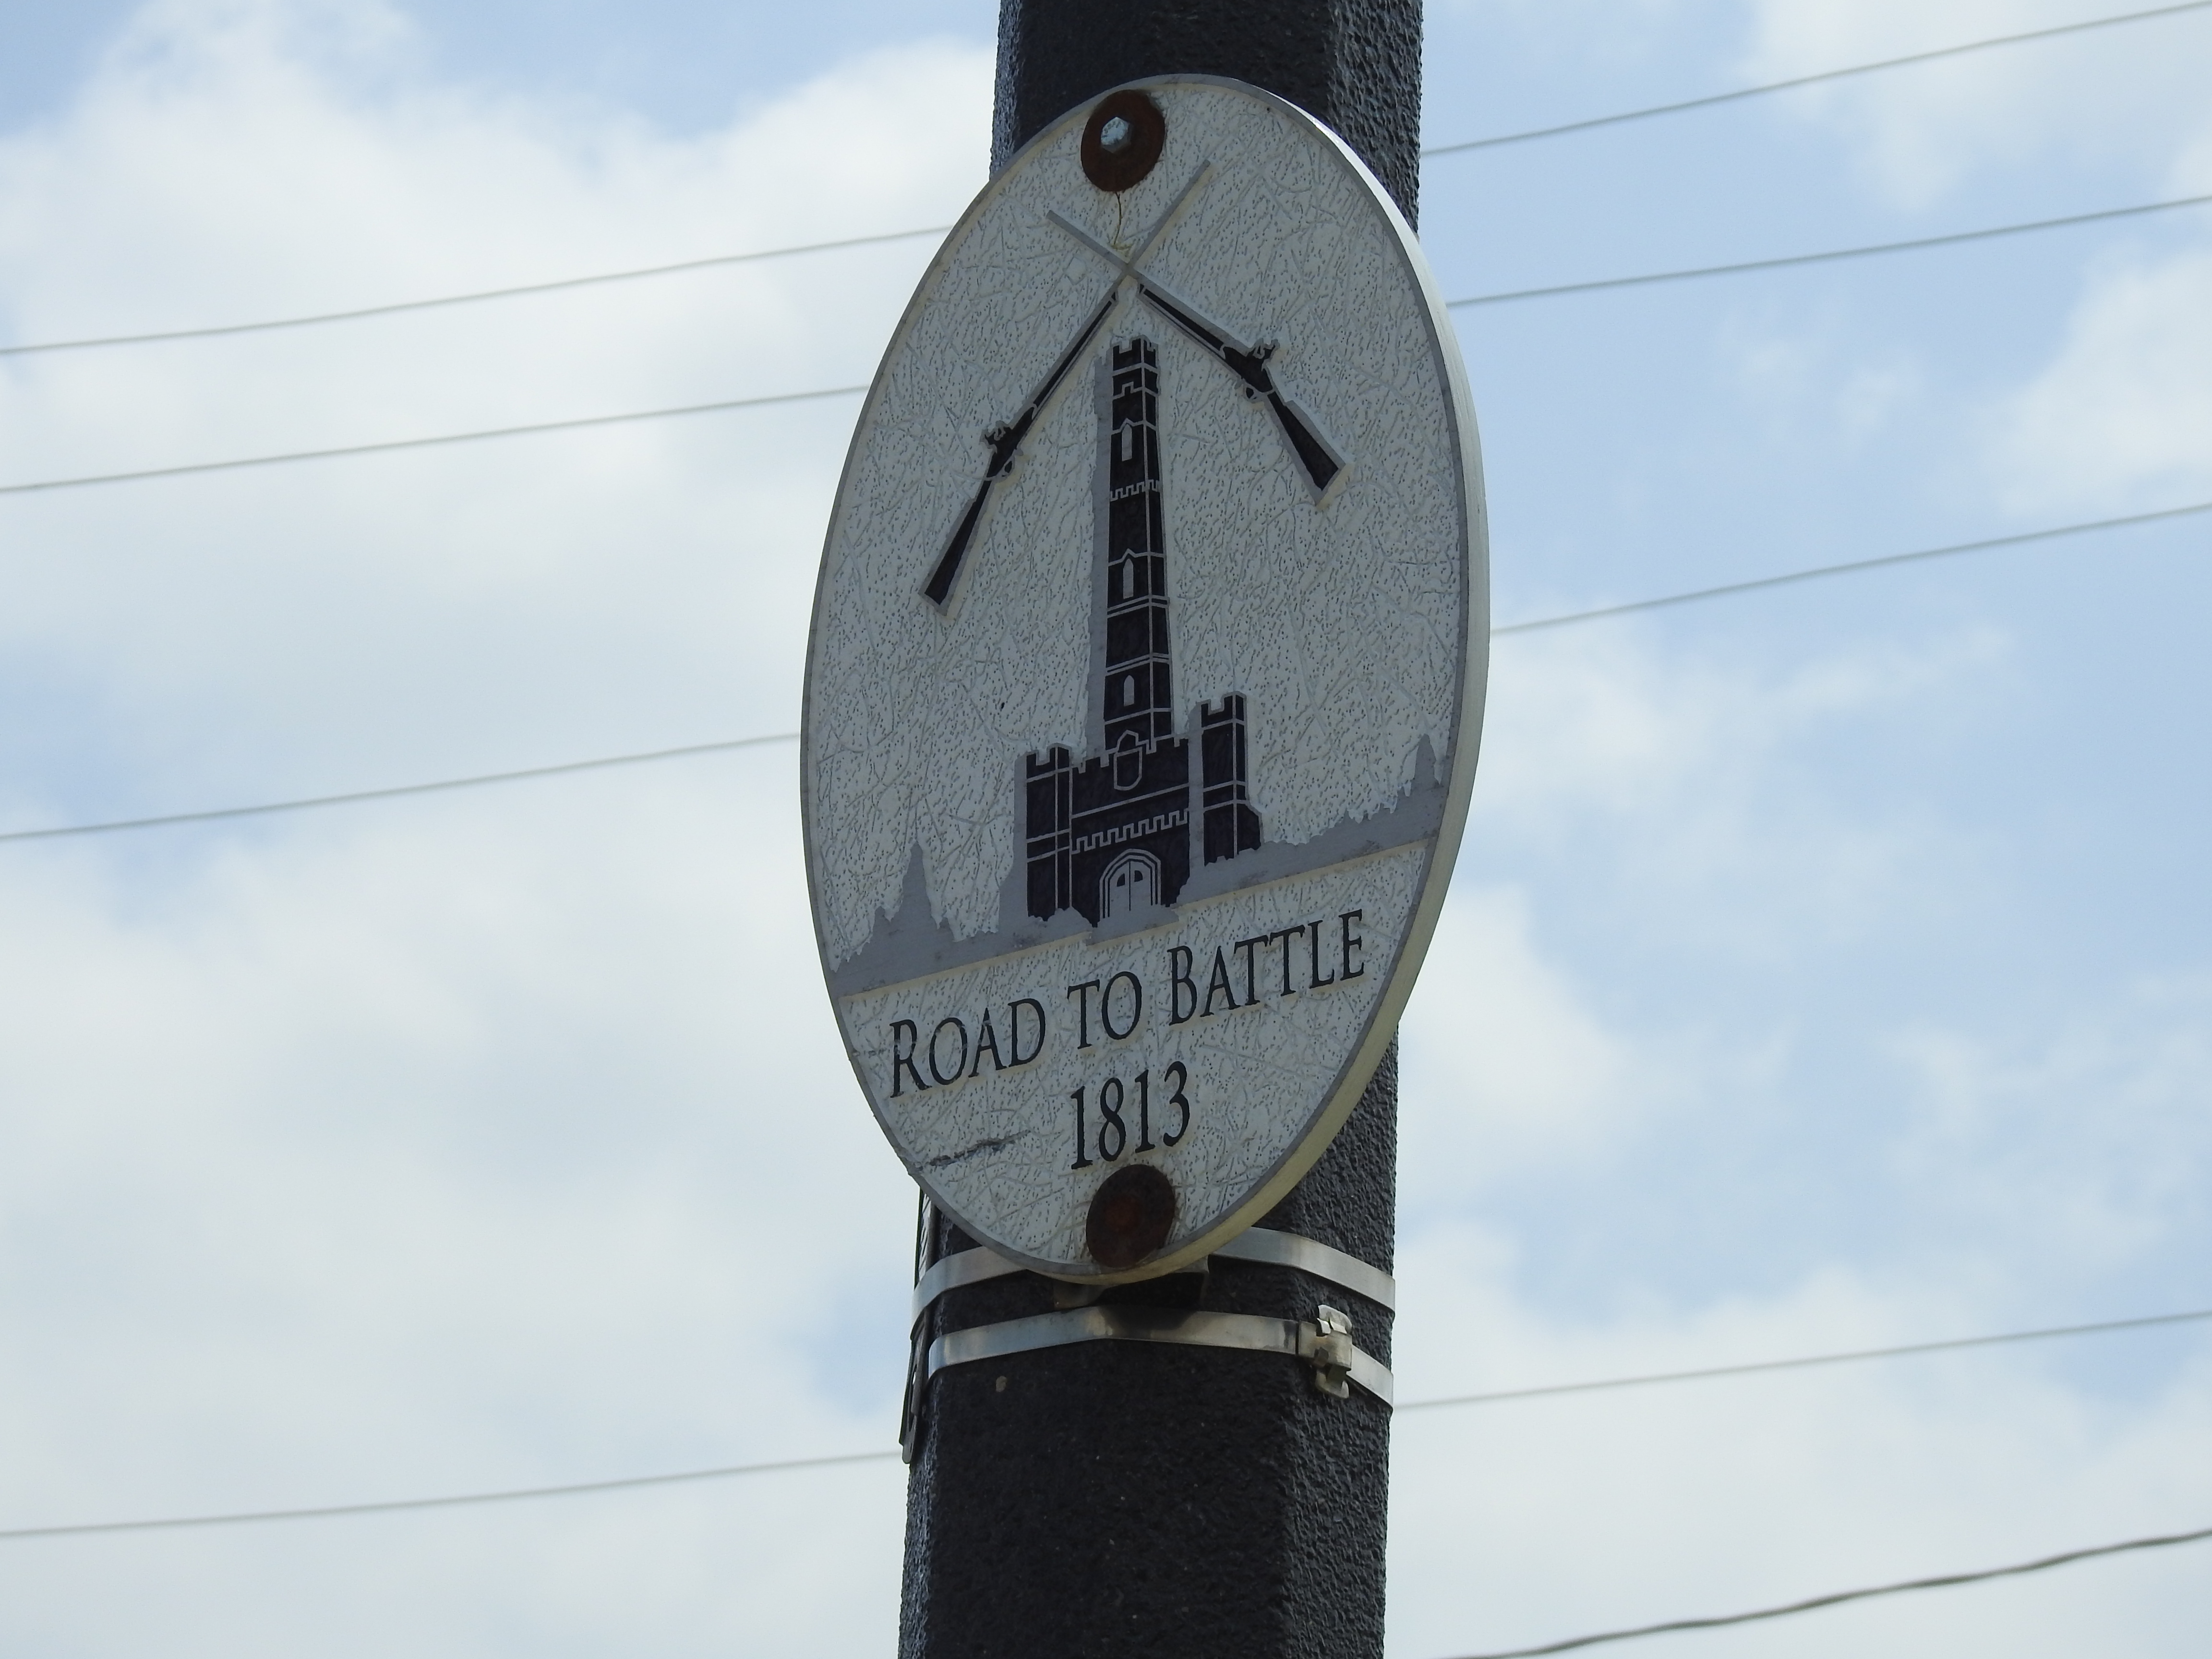 Road to Battle street sign